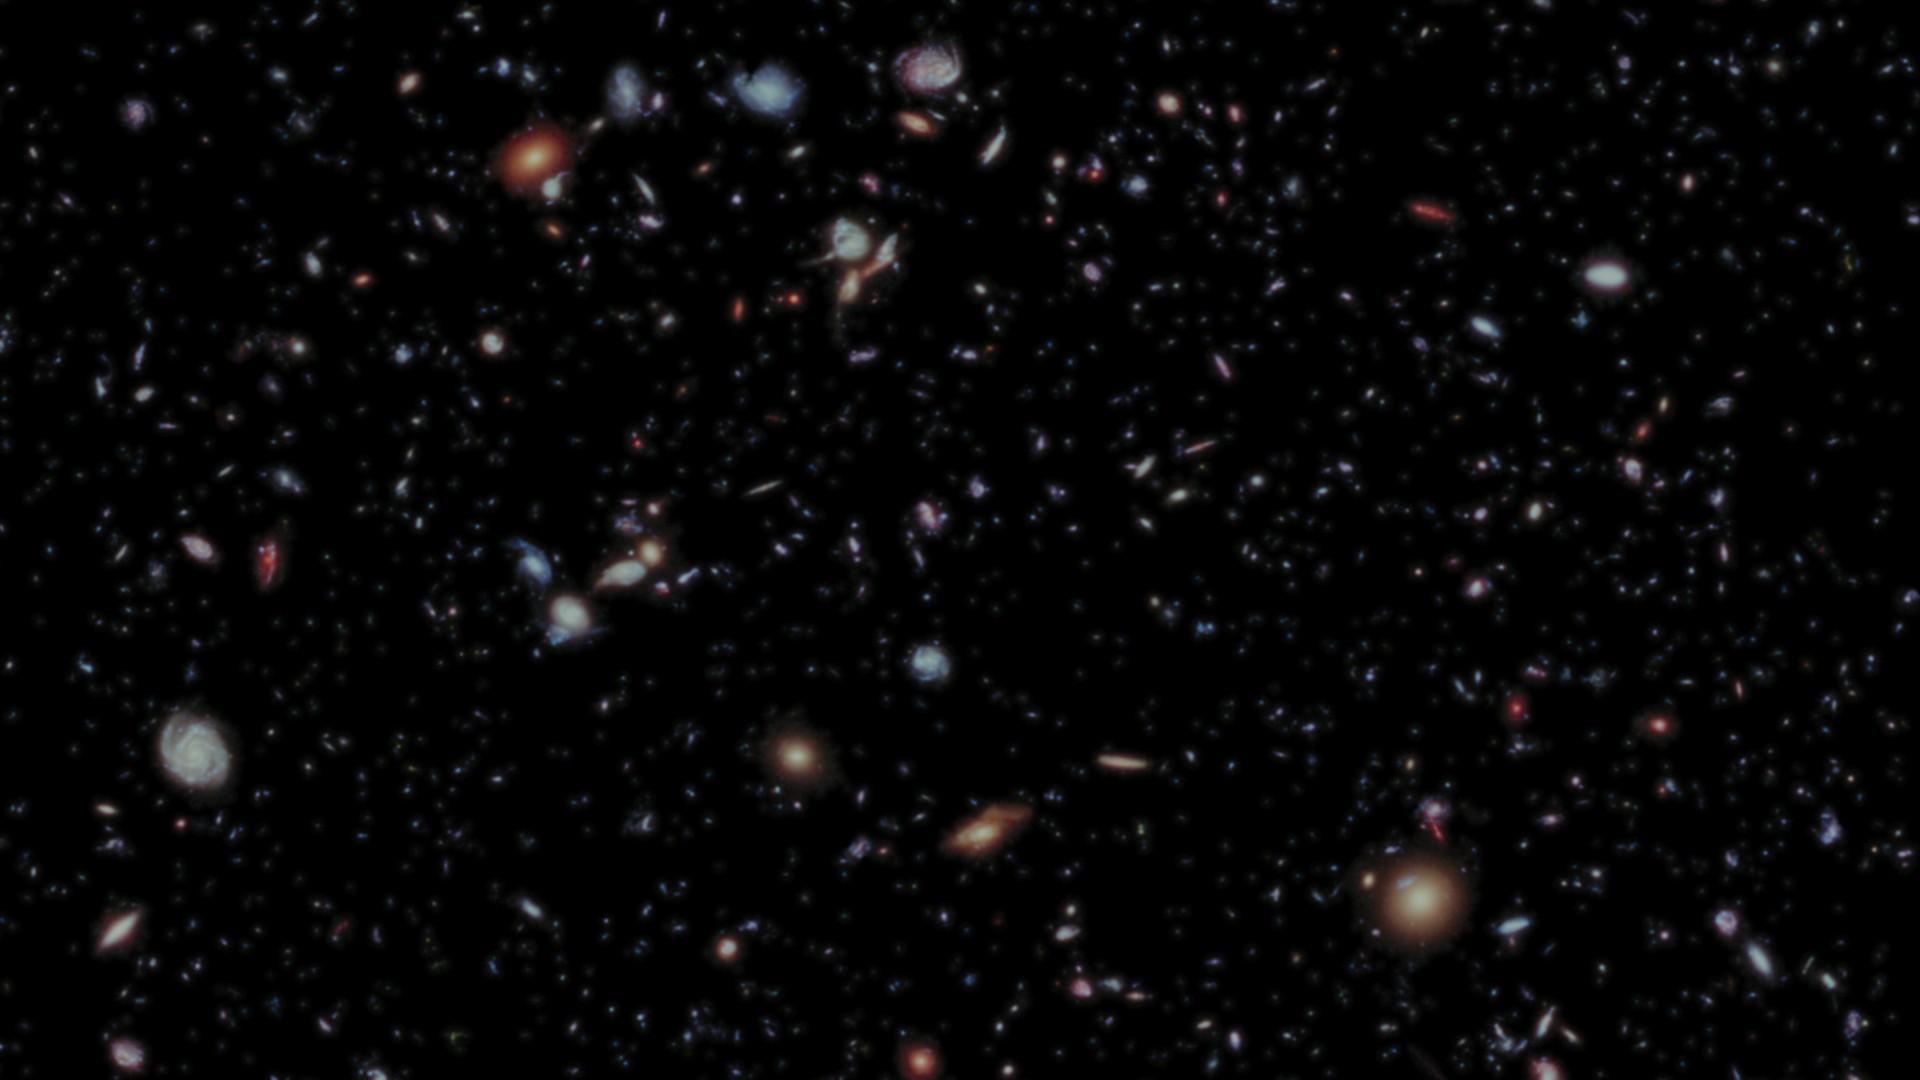 Preview Image for Exploring the Hubble eXtreme Deep Field